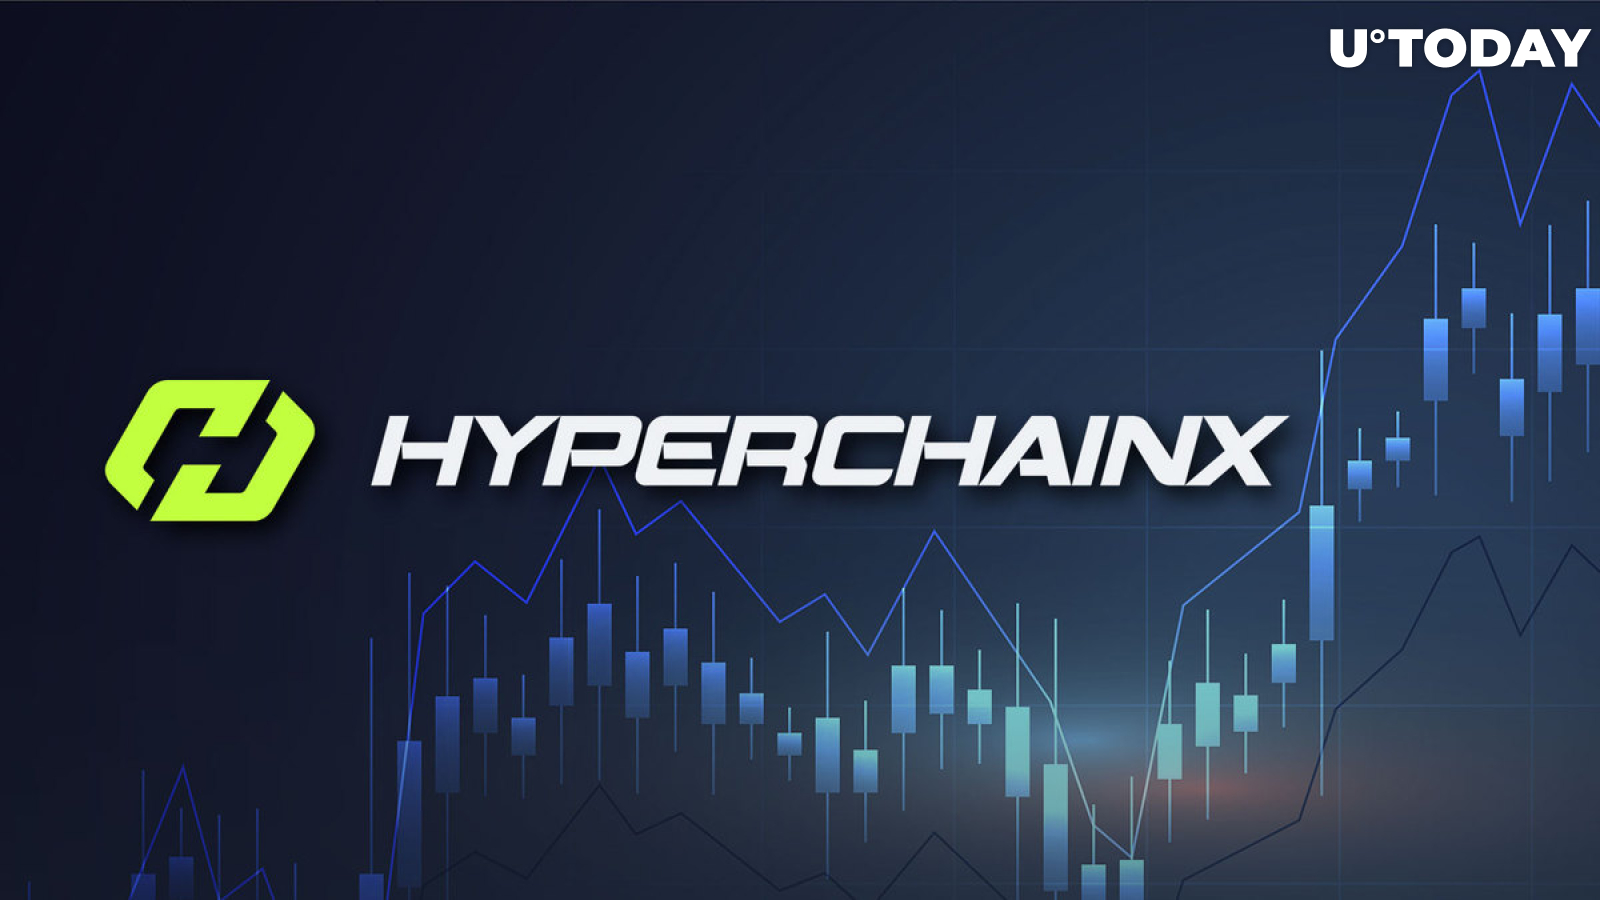 HyperChainX (HYPER) up 175%, Here's Why This Token Is Trending